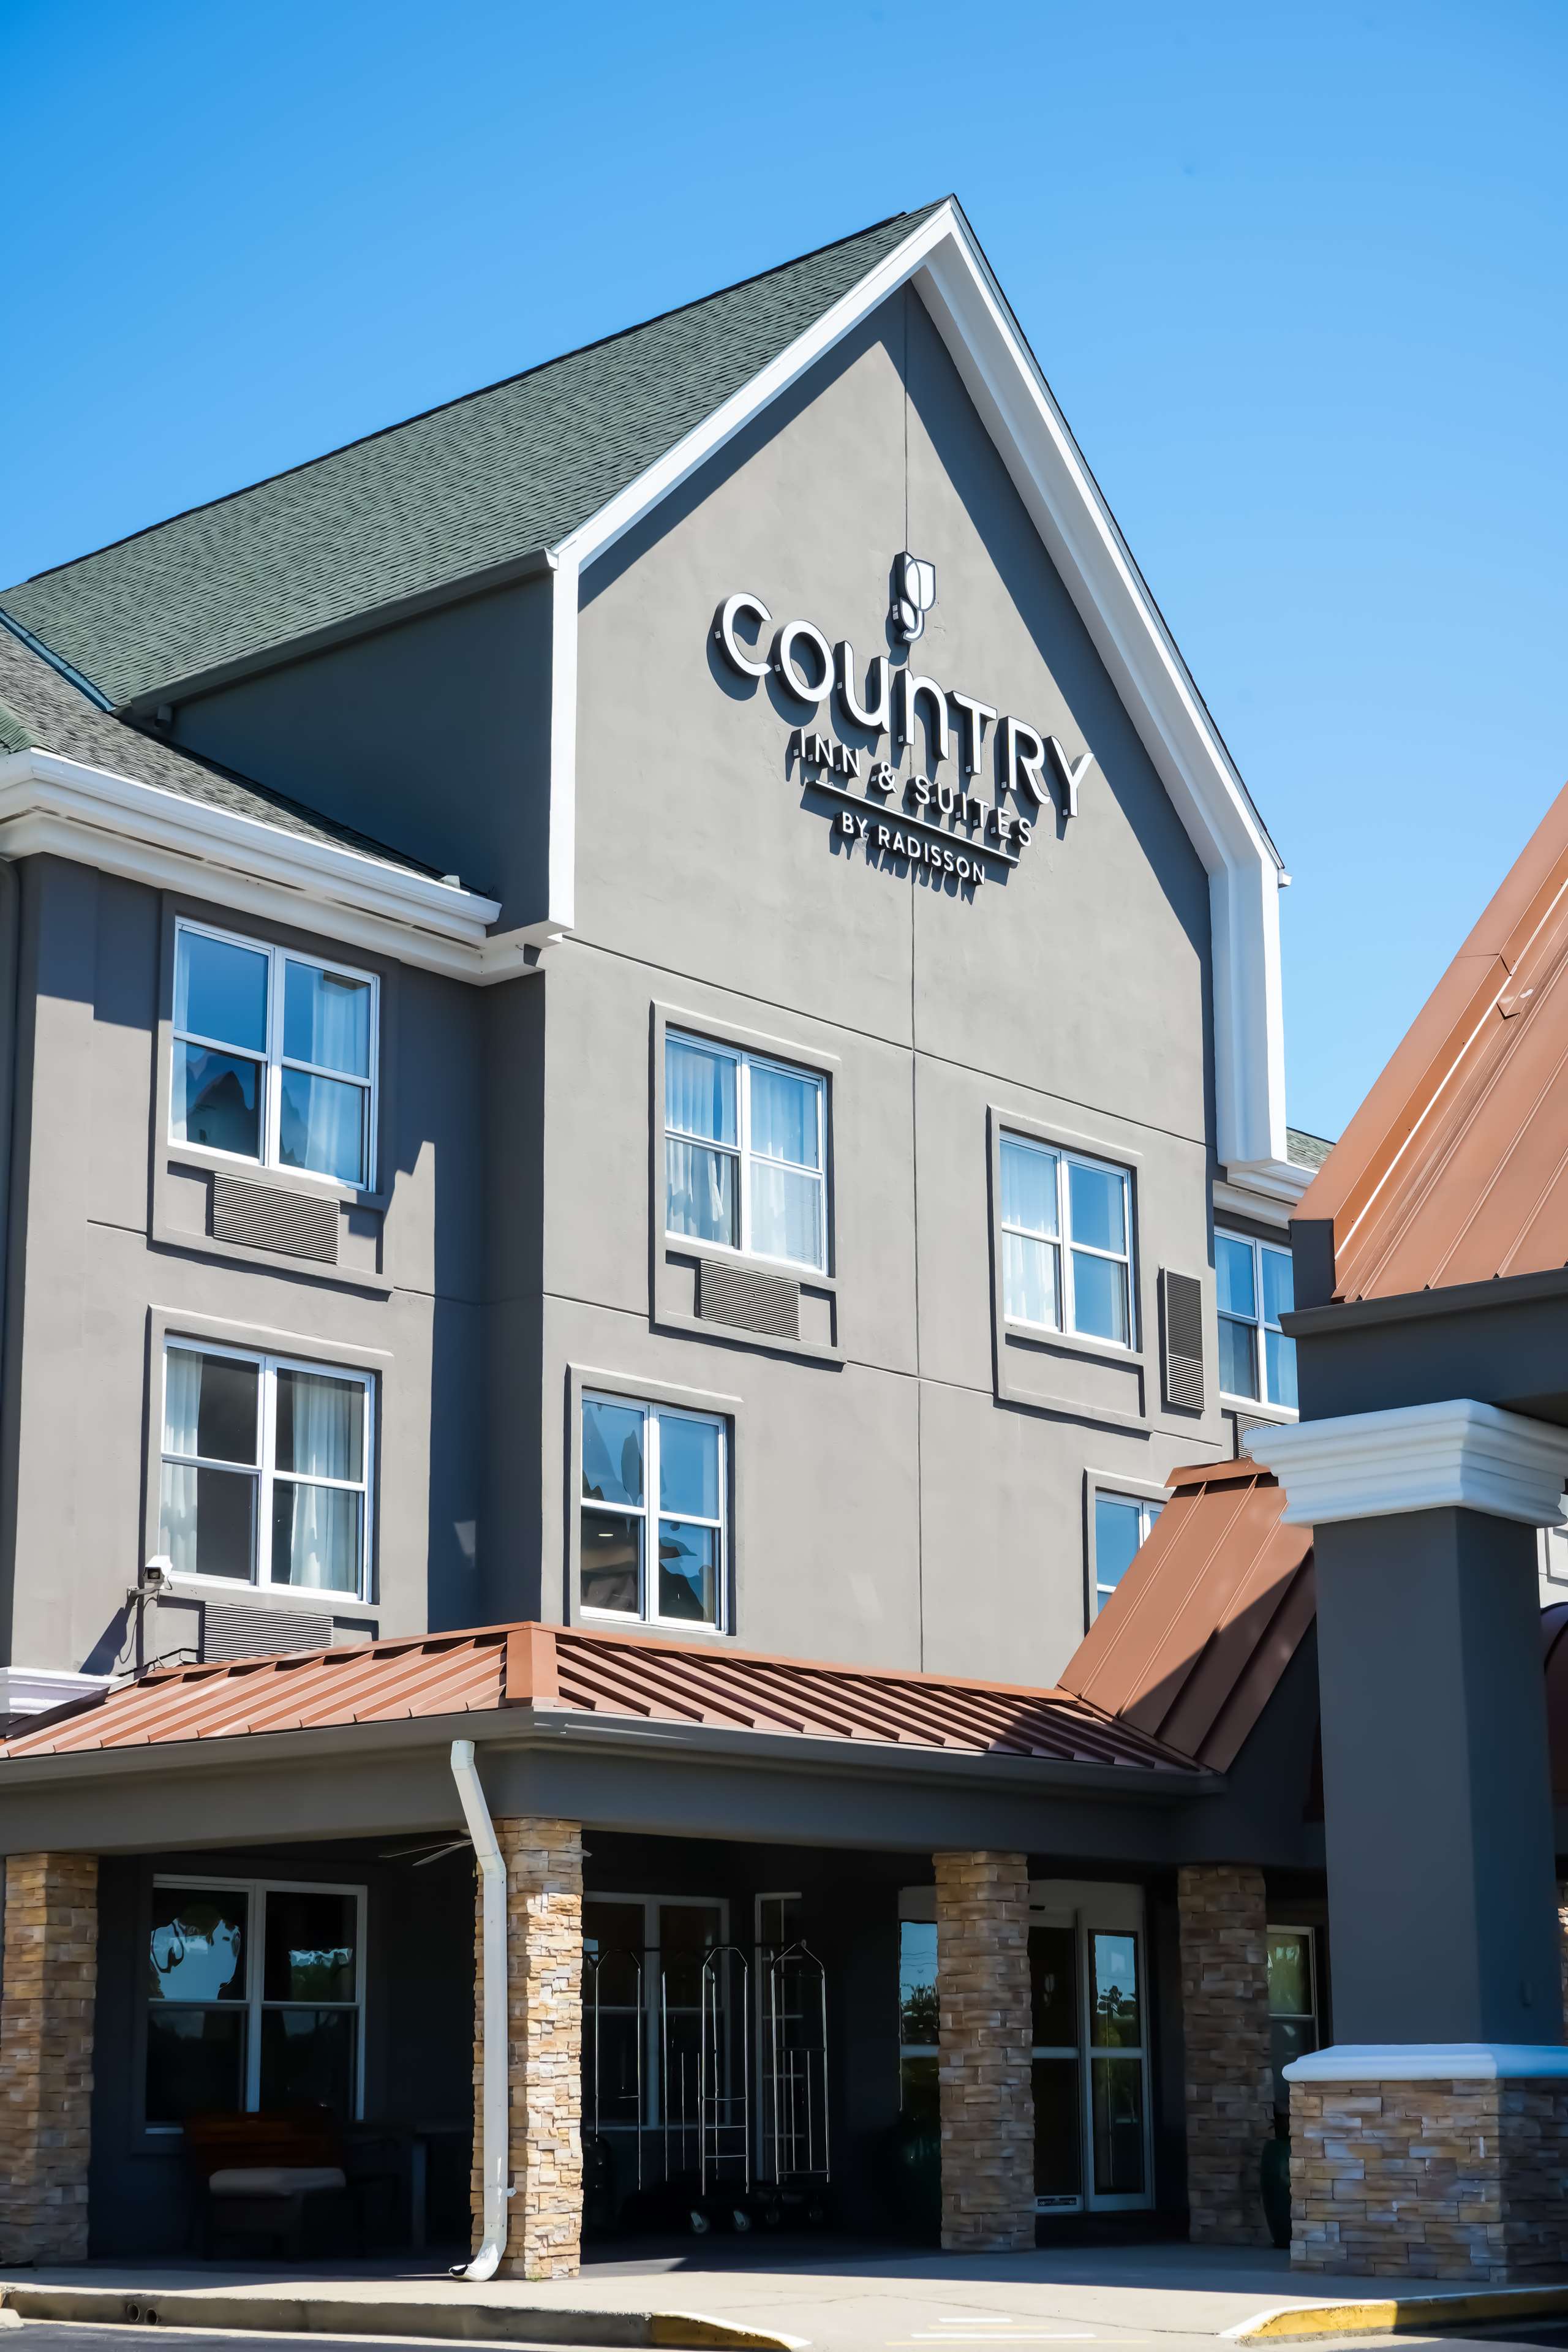 Country Inn & Suites by Radisson, Myrtle Beach, SC Photo